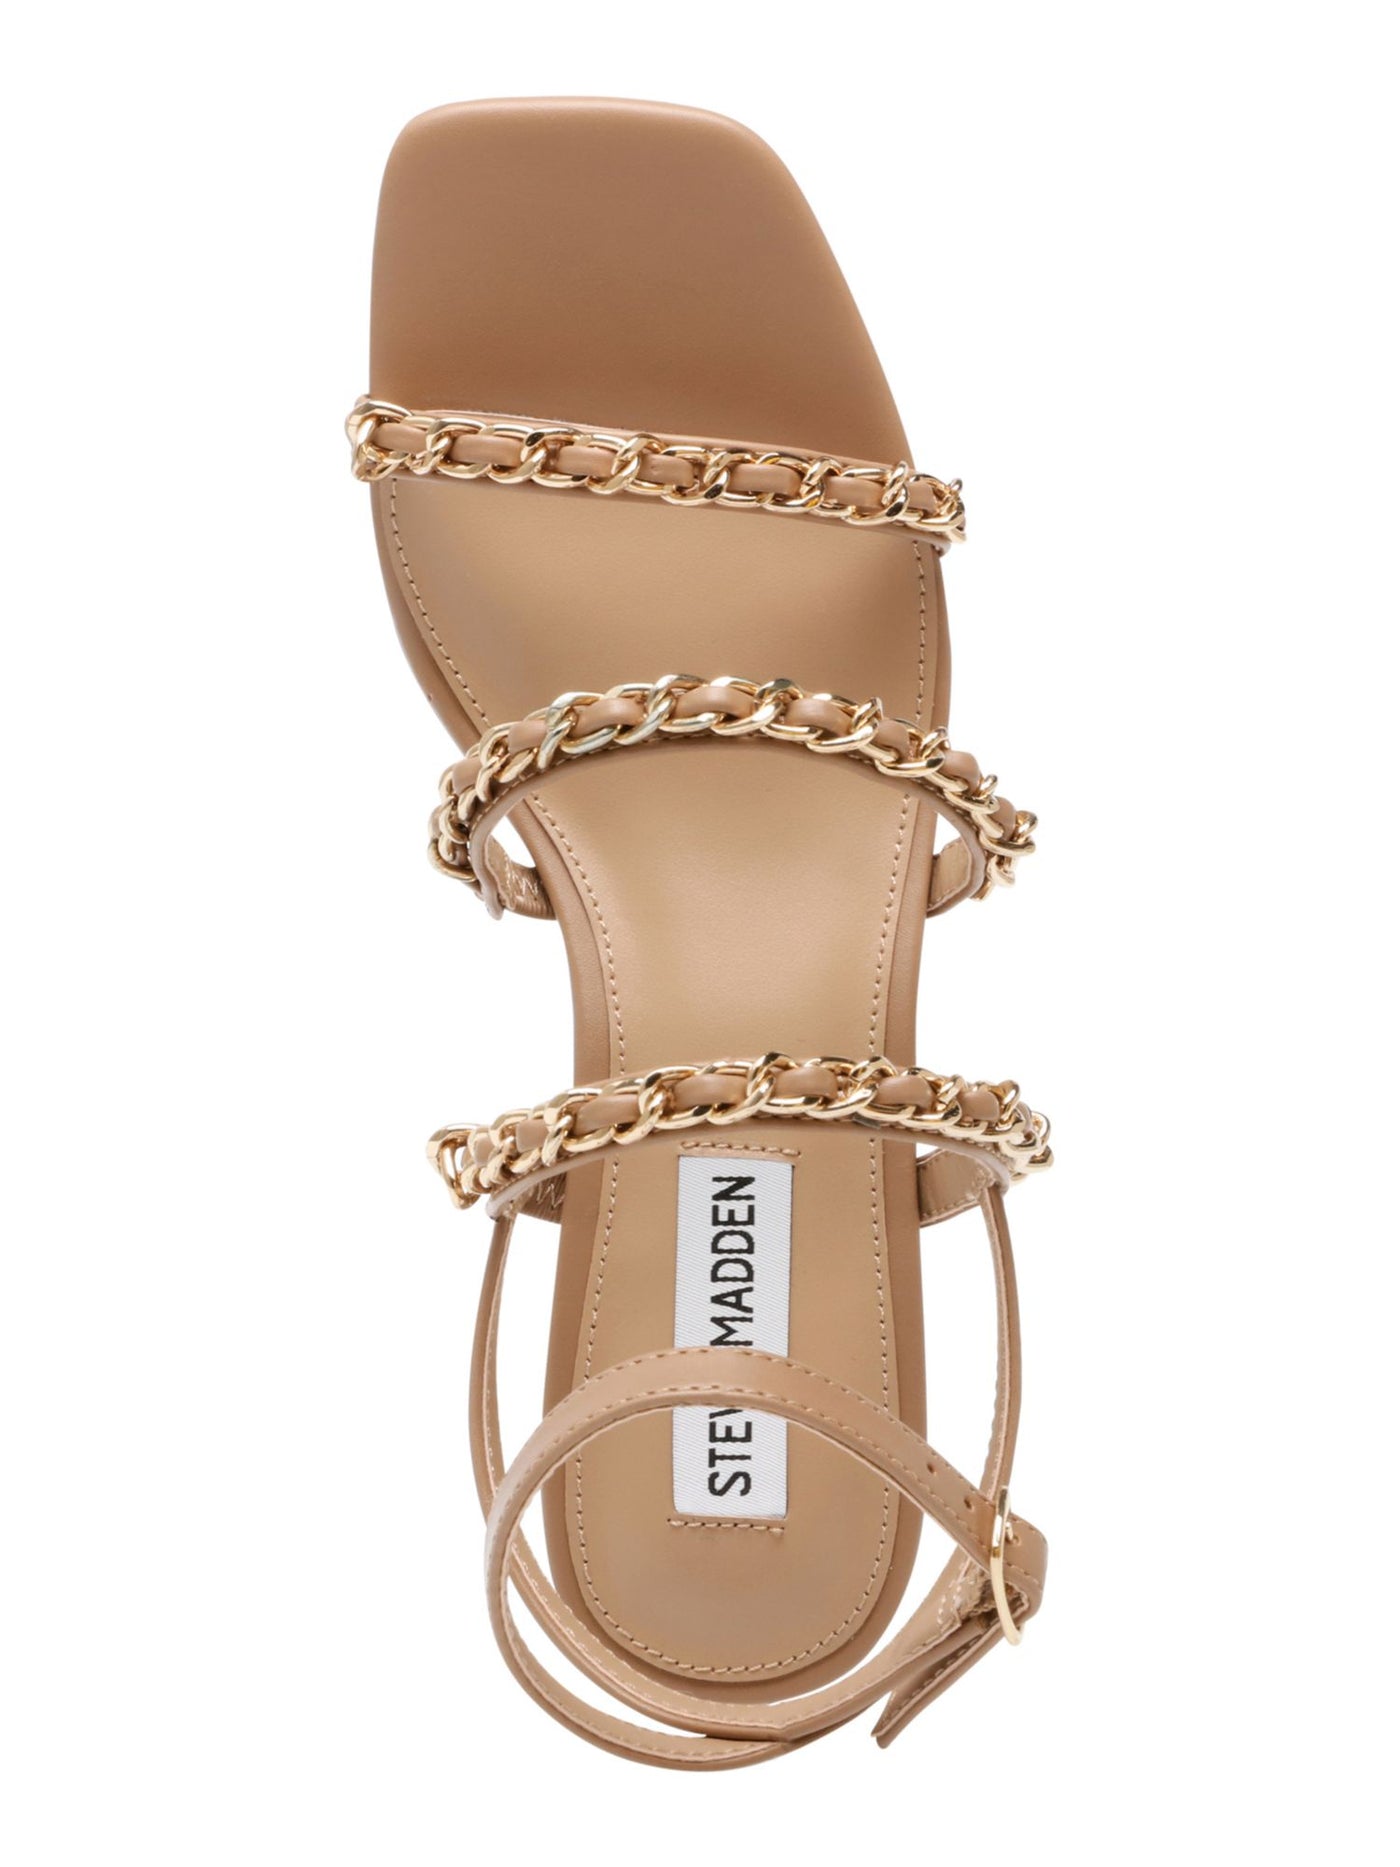 STEVE MADDEN Womens Tan Beige Chain Accent Ankle Strap Adjustable Strap Interested Square Toe Block Heel Buckle Dress Sandals Shoes 11 M